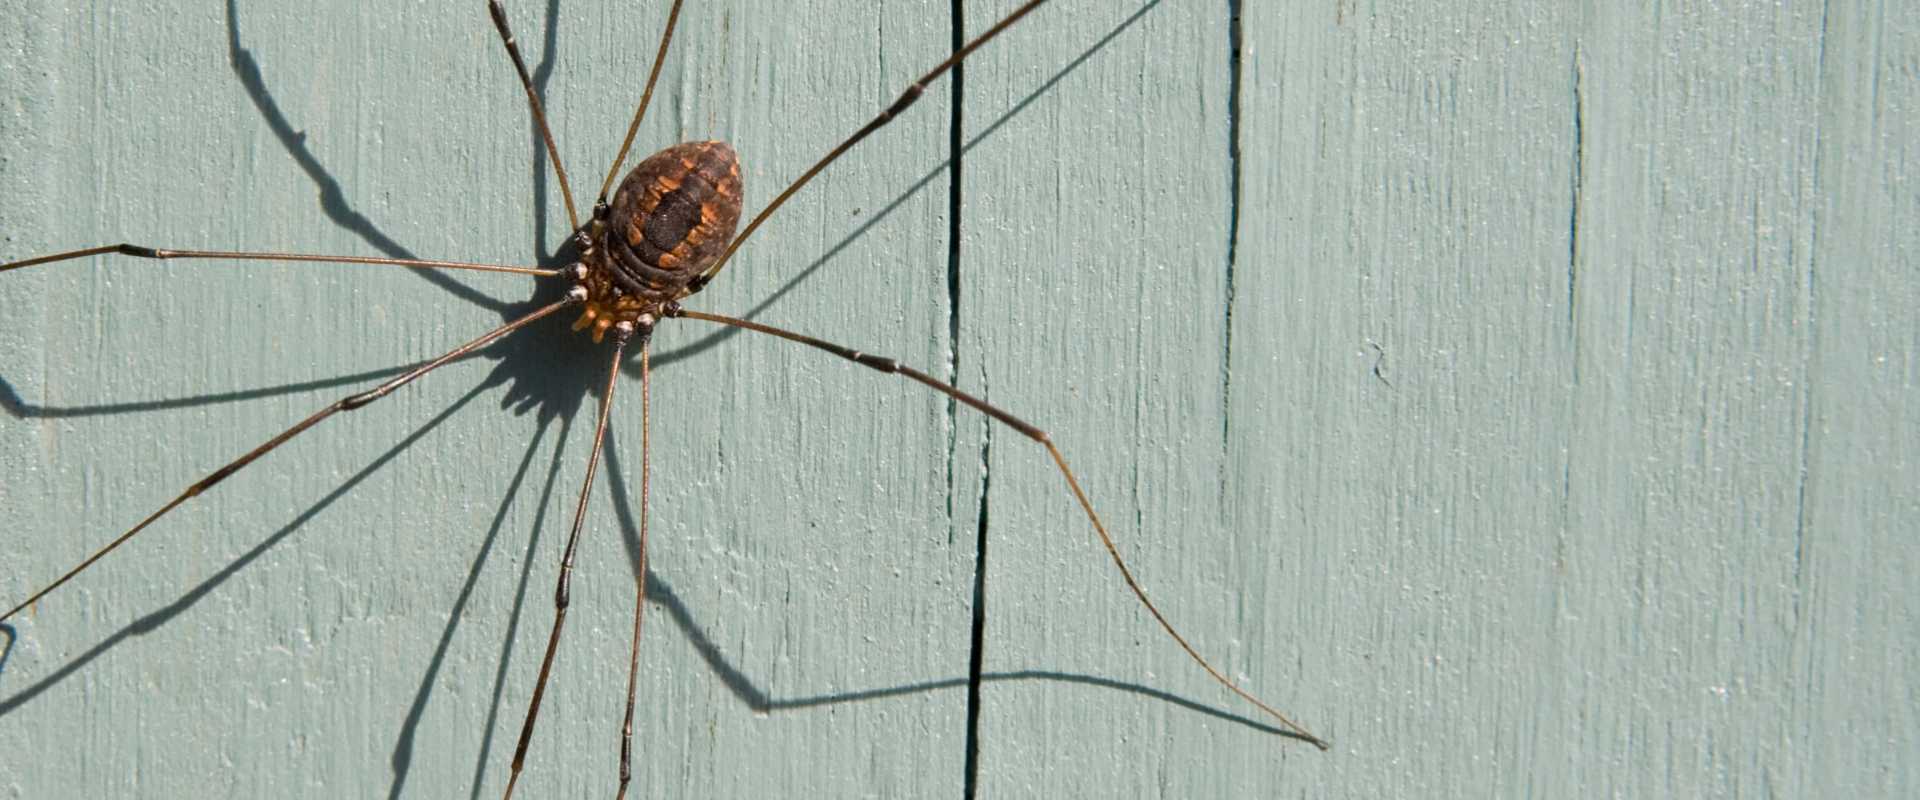 daddy long legs spiders